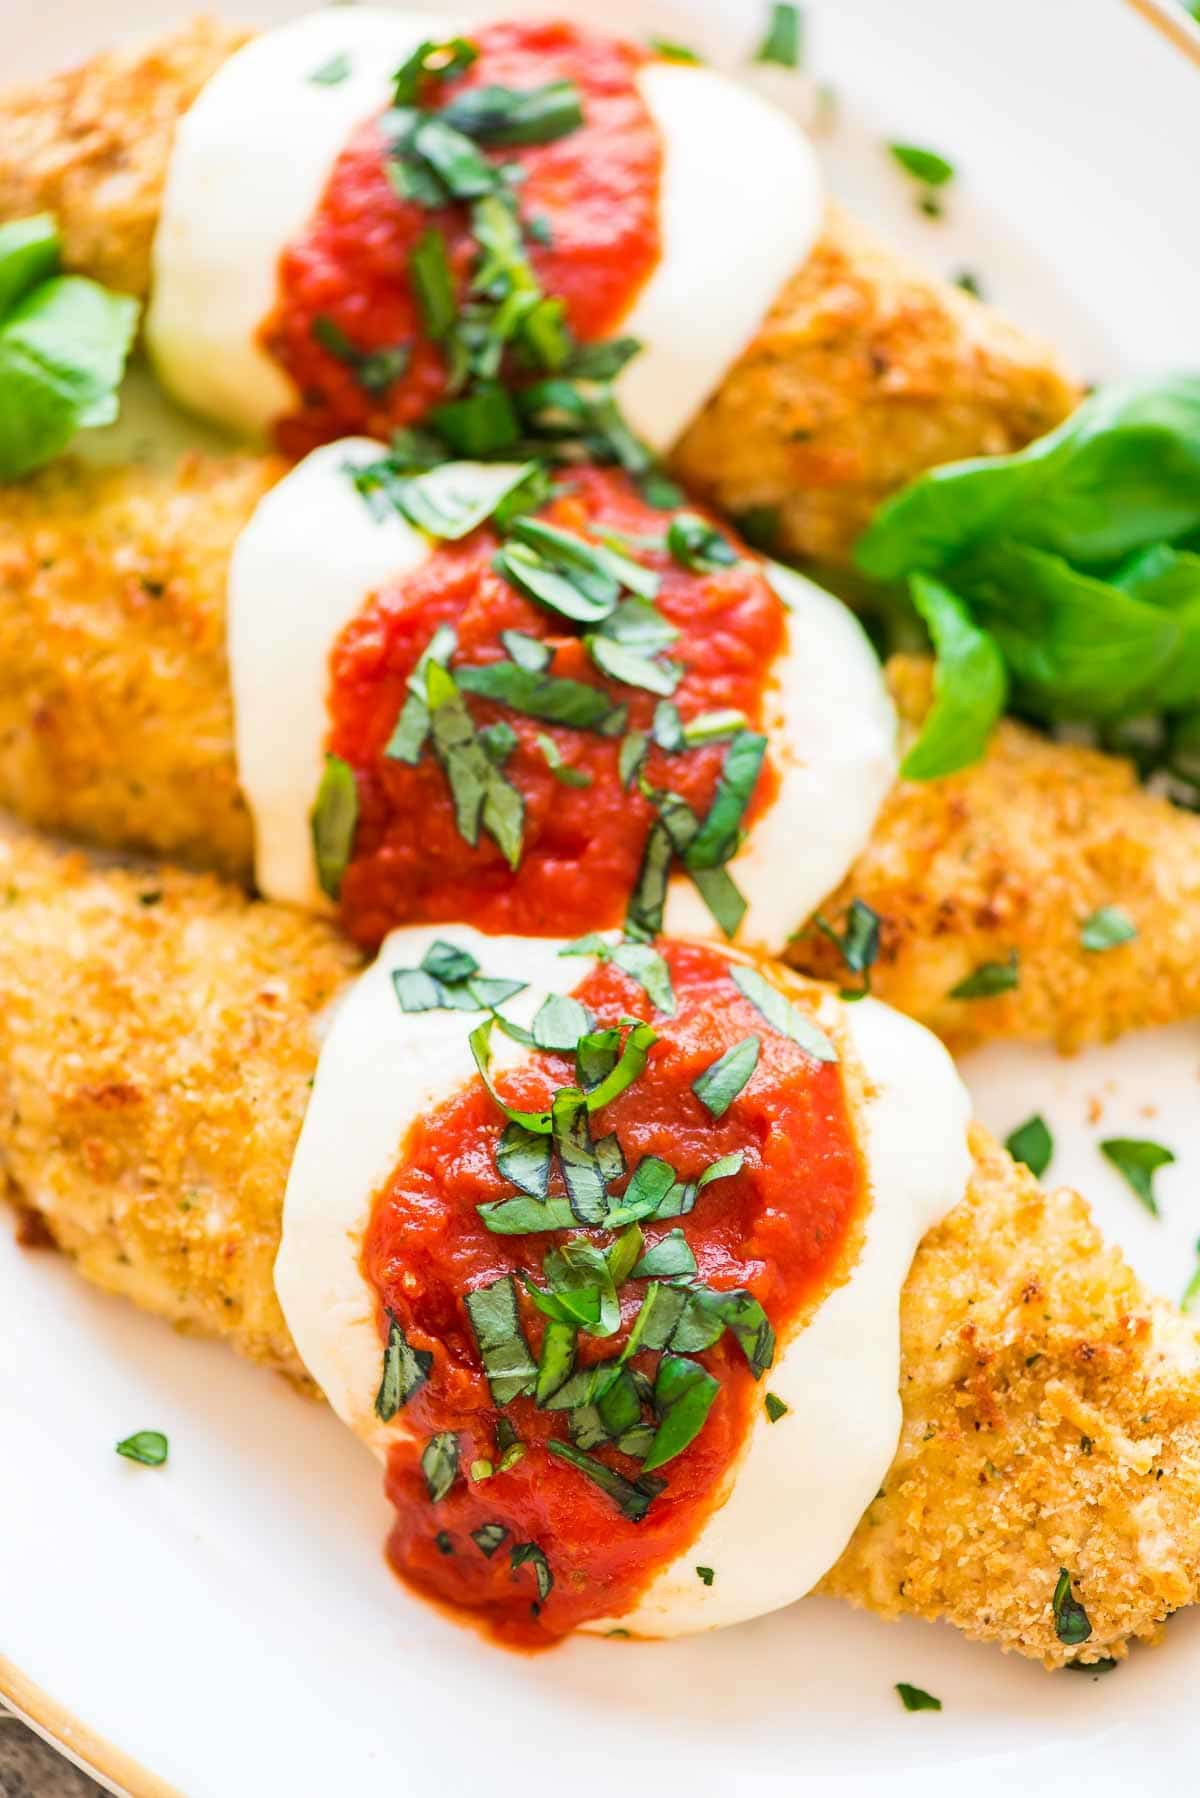 Healthy Baked Chicken Recipes
 Baked Chicken Parmesan